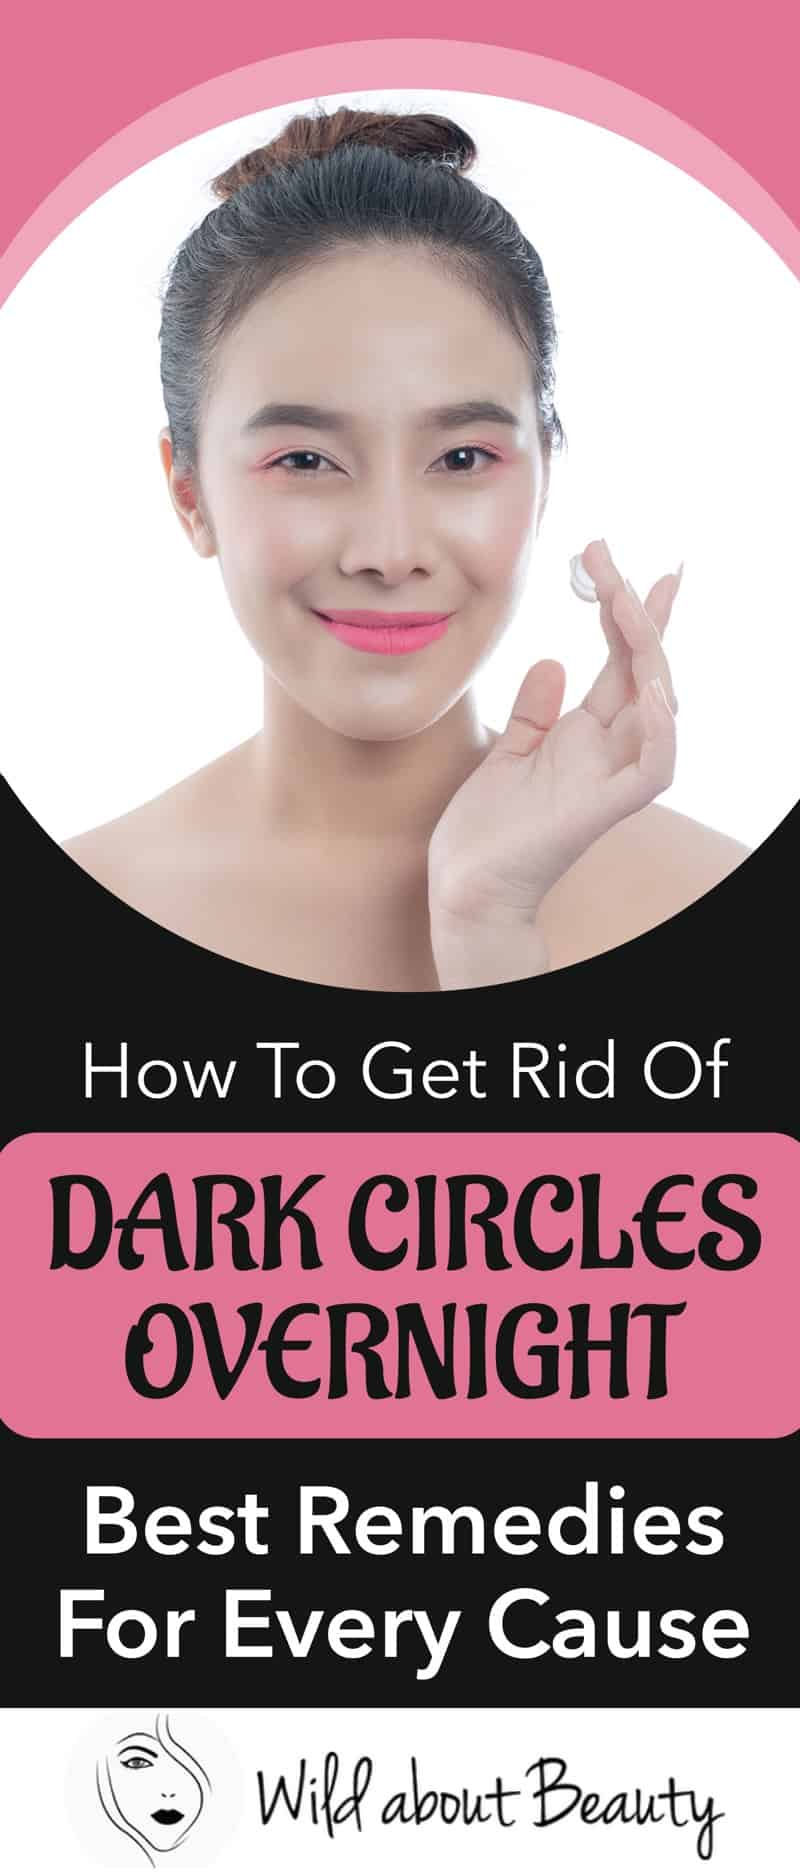 How To Get Rid Of Dark Circles Overnight